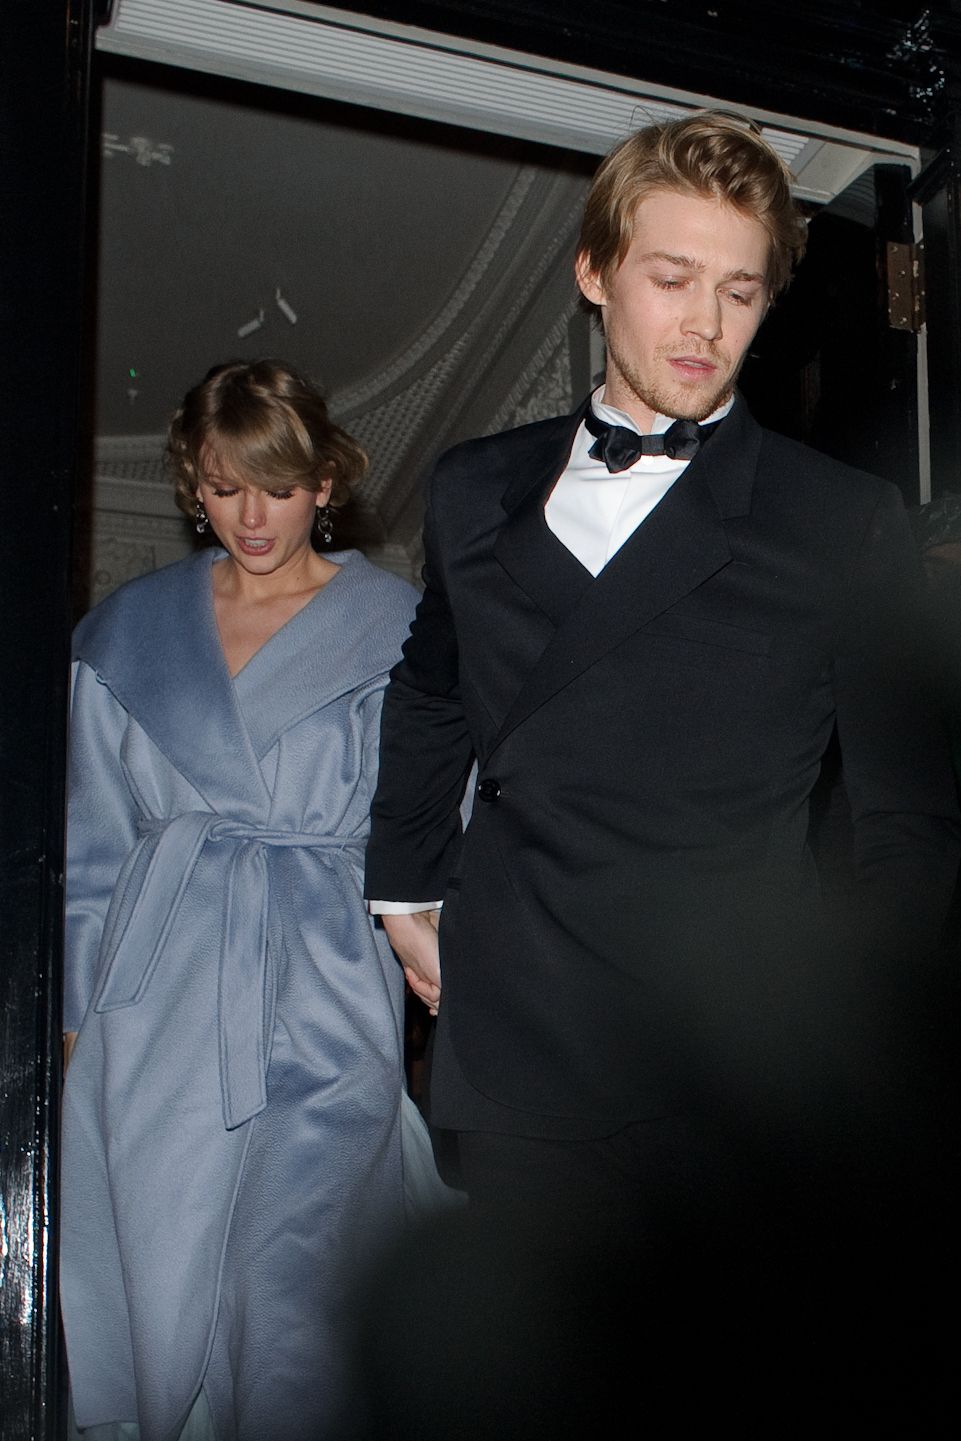 Why Taylor Swift Is Ready to Be More Public About Her 4-Year Romance With Joe Alwyn